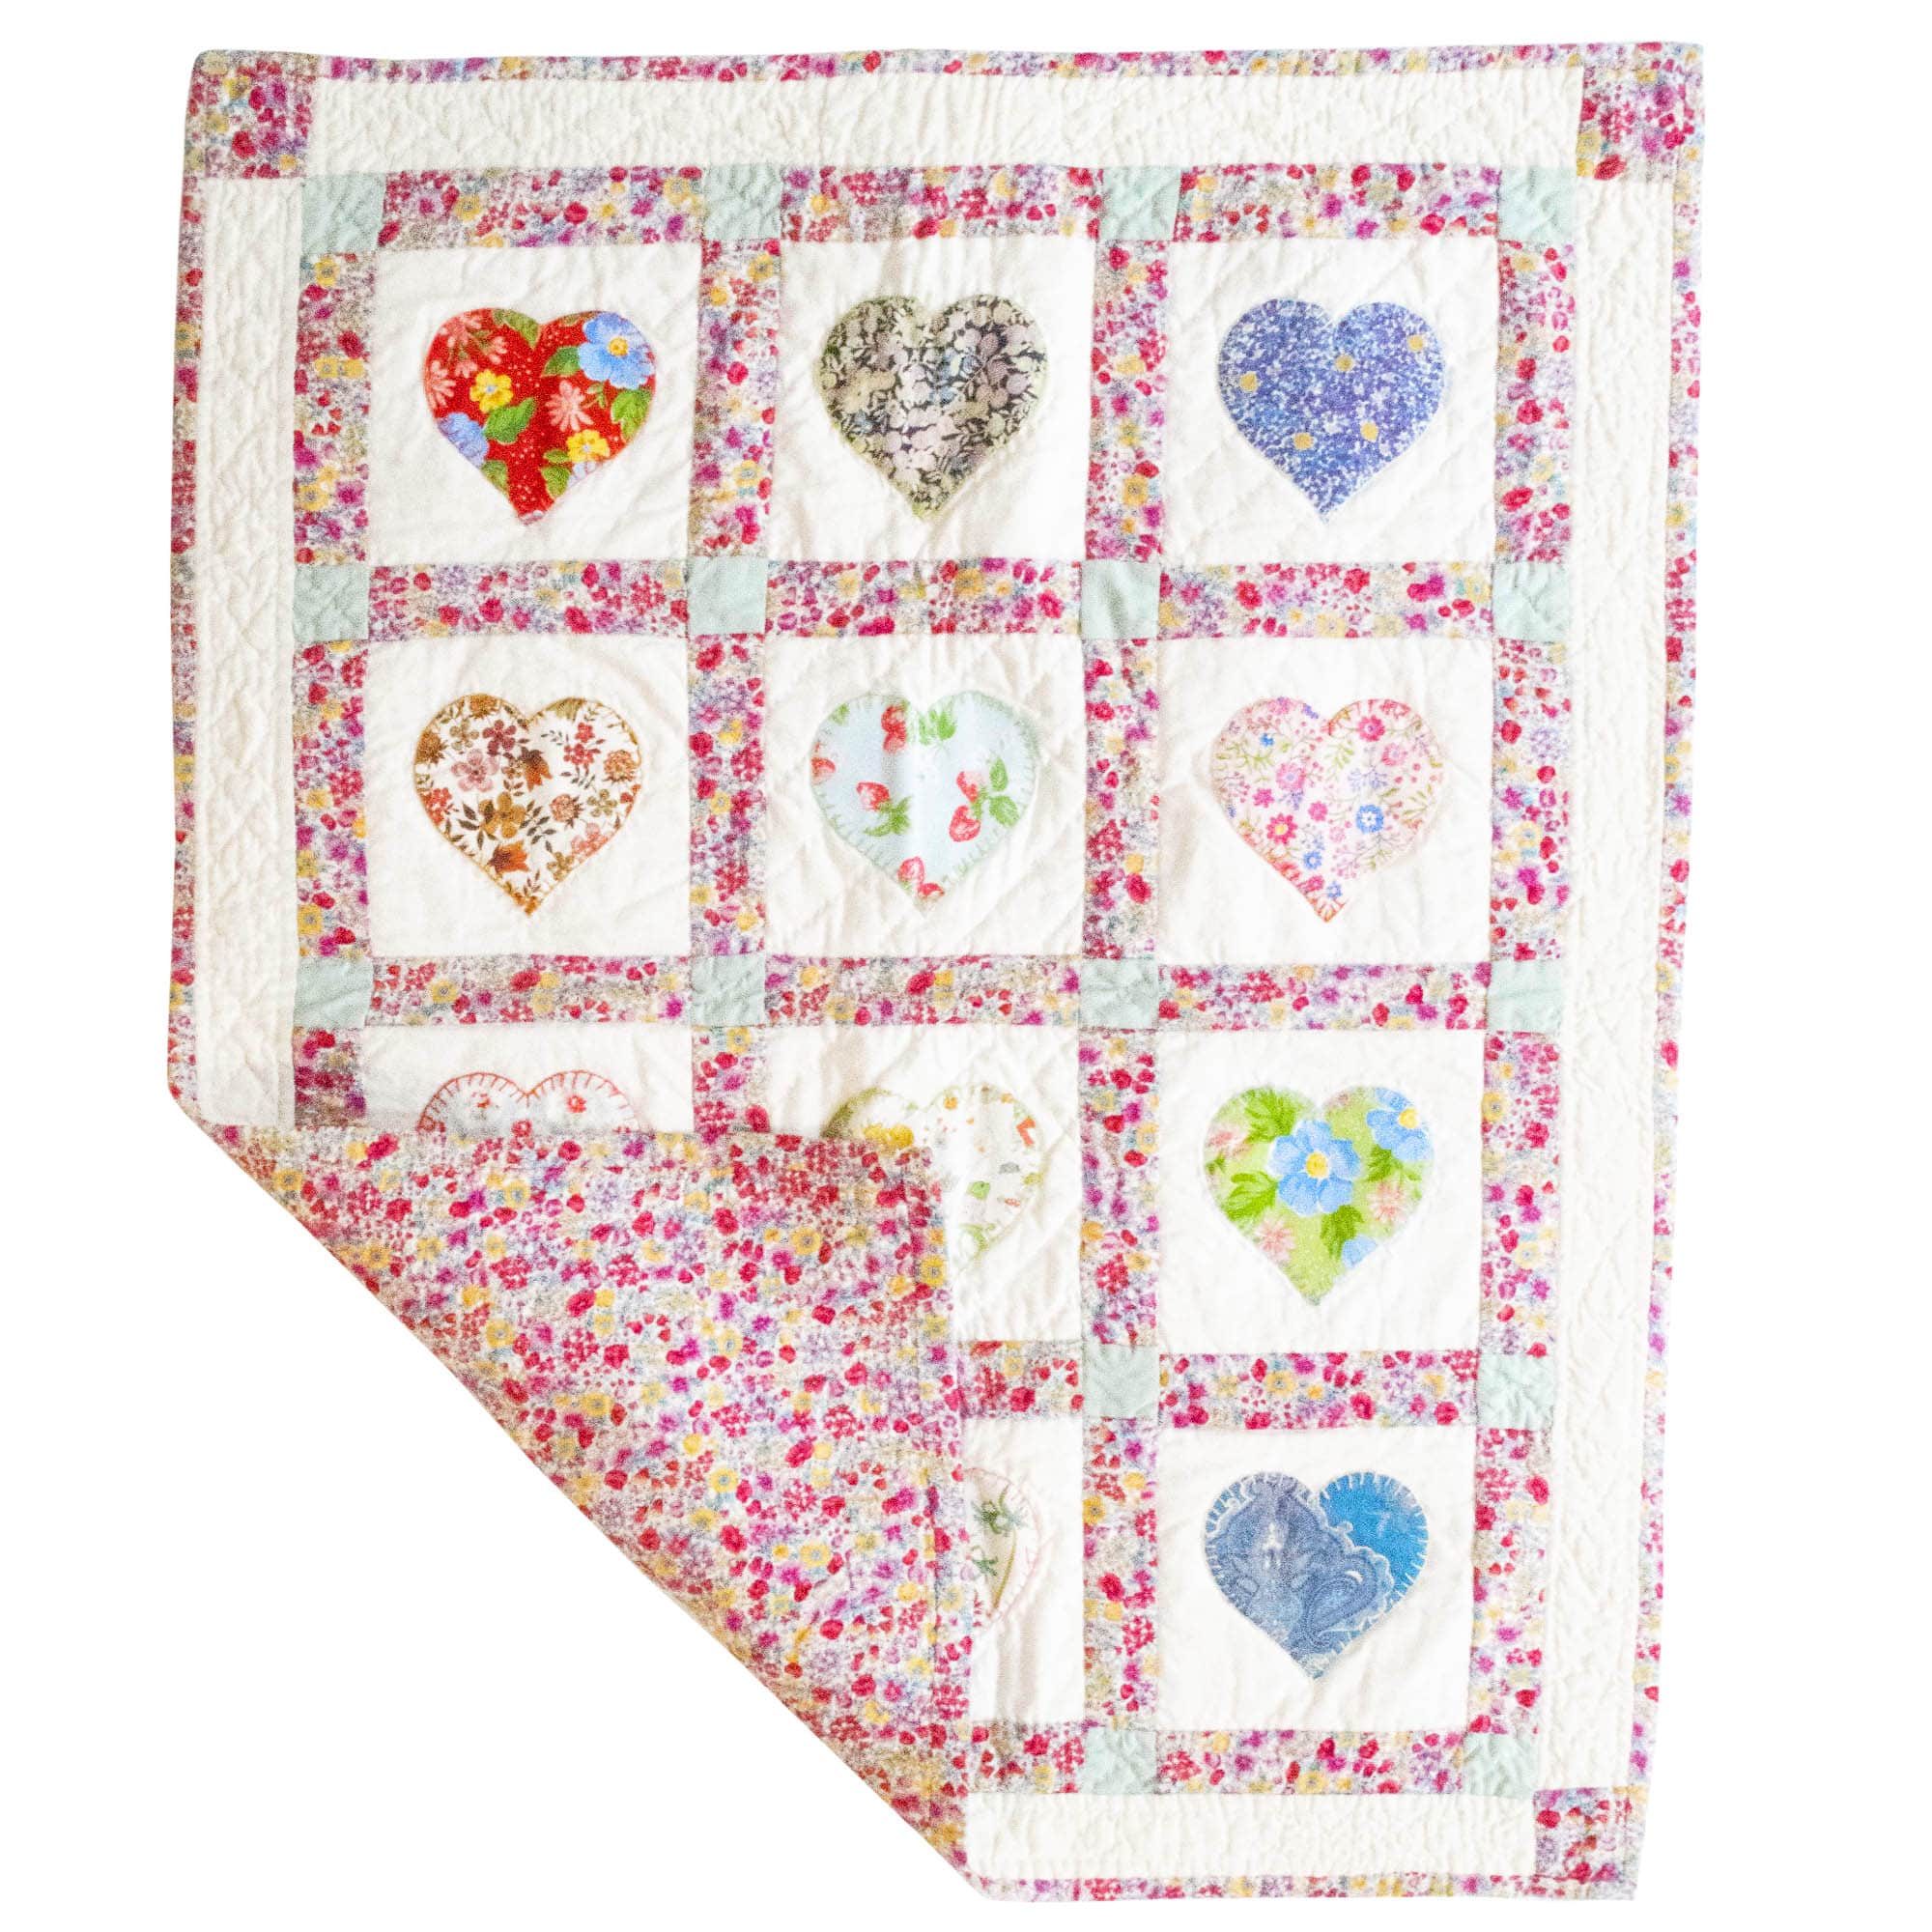 Fine Cell Work Childrens Handmade Quilt Pink Floral Hearts Unique Birth Christening Christmas Present Gift